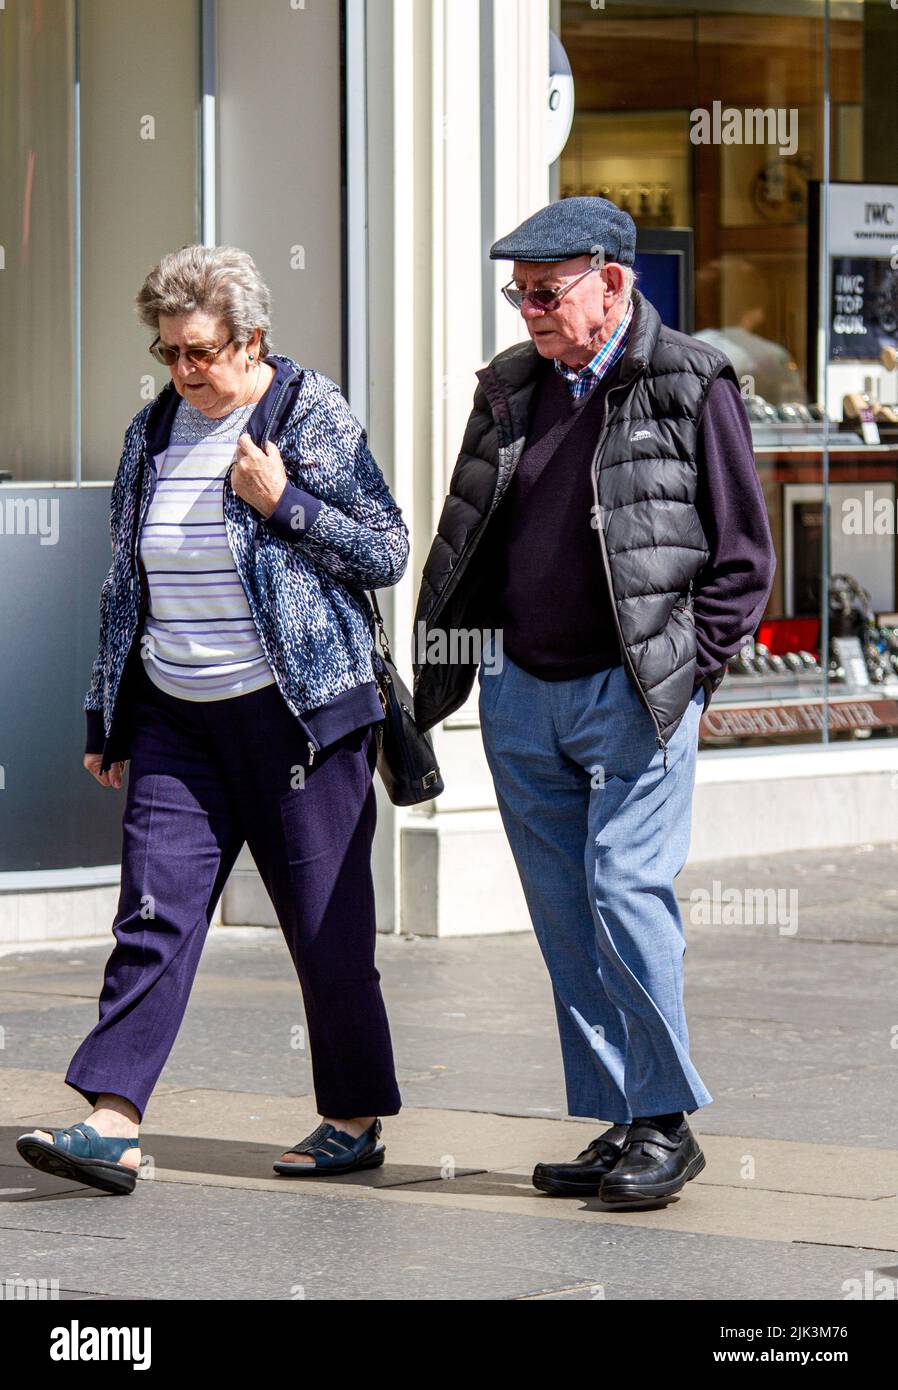 Dundee, Tayside, Scotland, UK. 30h July, 2022. UK Weather: Temperatures in North East Scotland reached 21°C due to the warm July sunshine. Senior couples are out and about in Dundee city centre enjoying the warm summer weather while shopping. Credit: Dundee Photographics/Alamy Live News Stock Photo